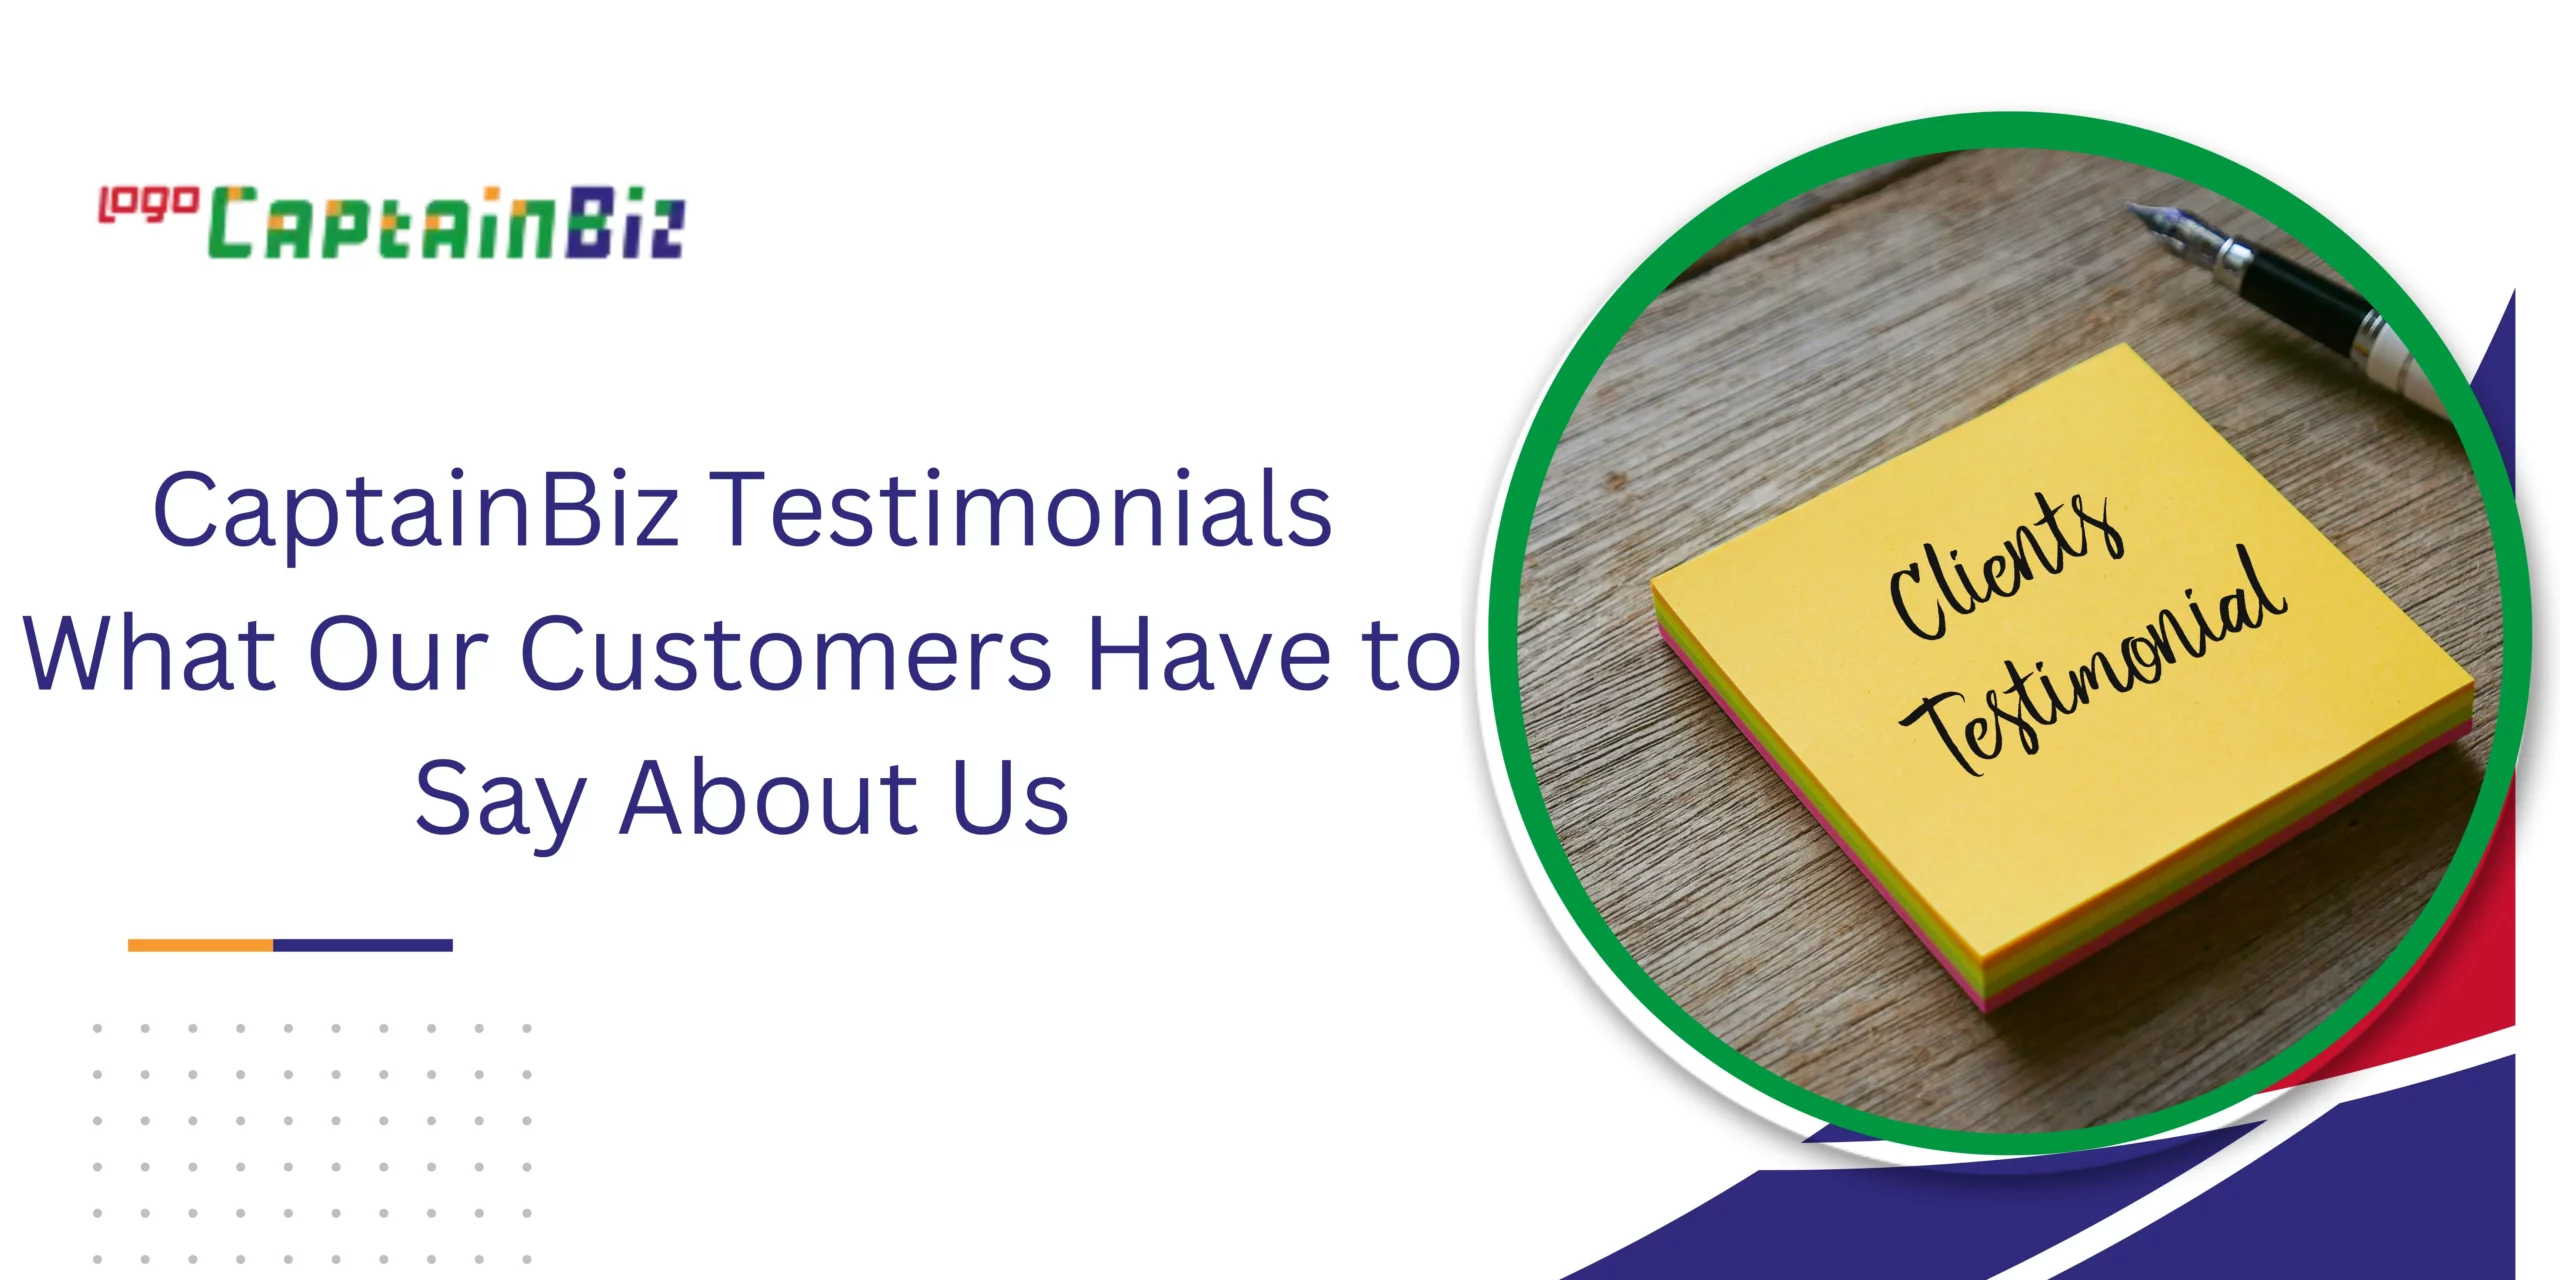 CaptainBIz: Testimonials What Our Customers Have to Say About CaptainBiz